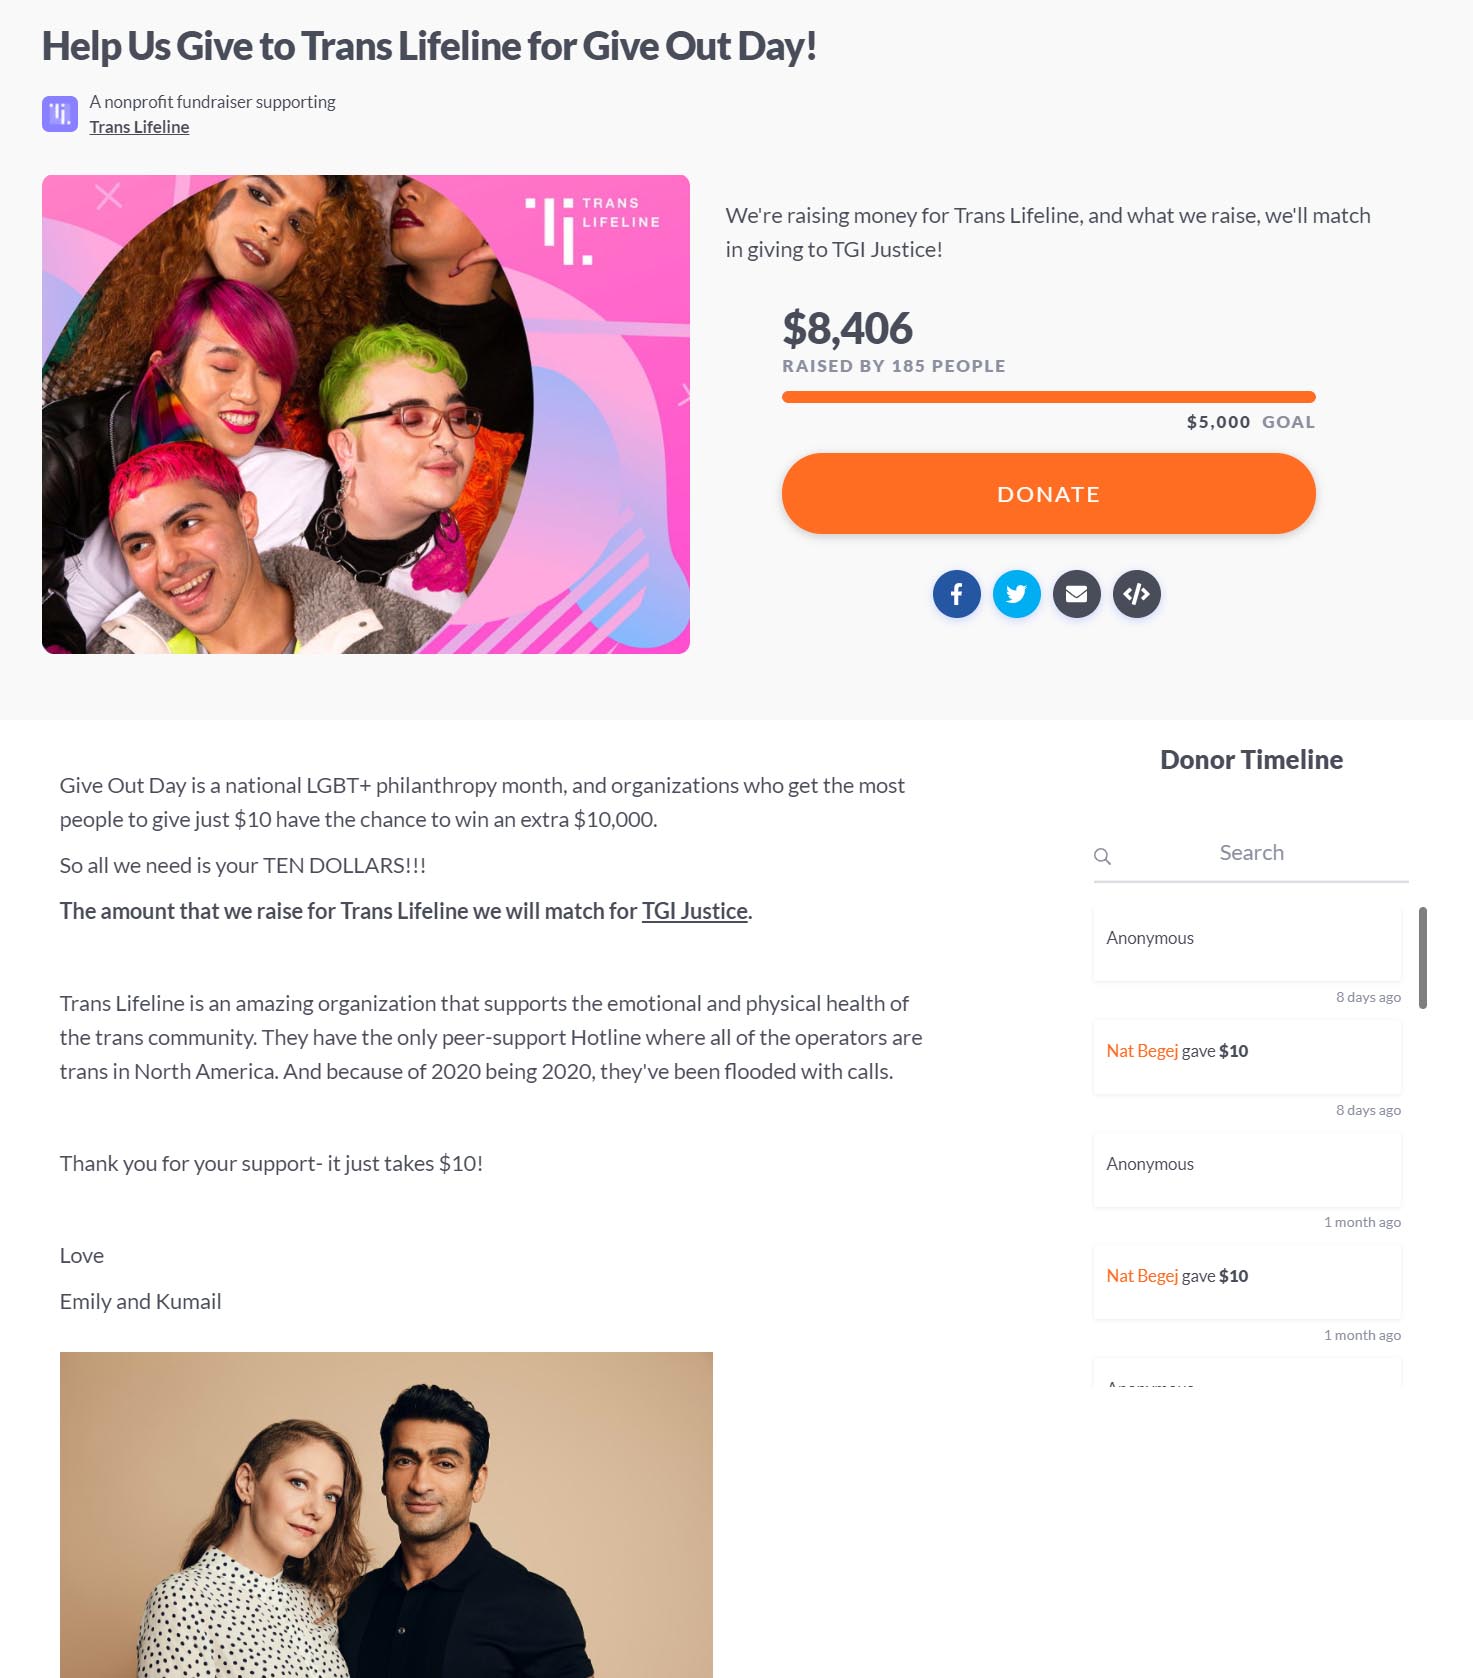 Screenshot of fundraiser page by Trans Lifeline